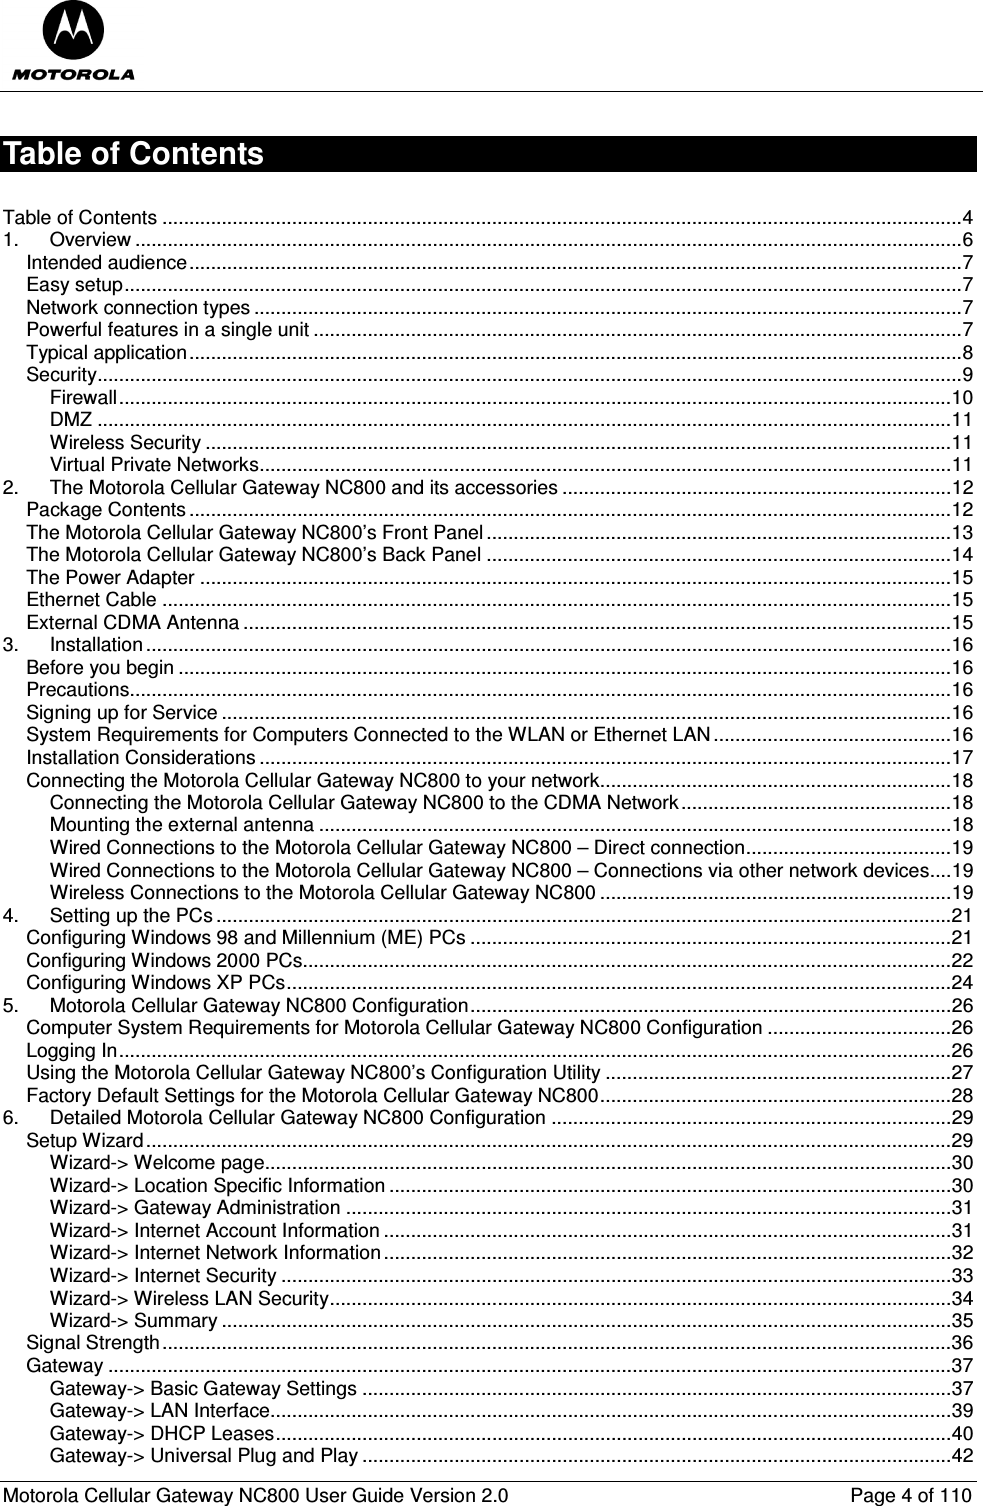  Motorola Cellular Gateway NC800 User Guide Version 2.0     Page 4 of 110  Table of Contents  Table of Contents ....................................................................................................................................................4 1. Overview .........................................................................................................................................................6 Intended audience...............................................................................................................................................7 Easy setup...........................................................................................................................................................7 Network connection types ...................................................................................................................................7 Powerful features in a single unit ........................................................................................................................7 Typical application...............................................................................................................................................8 Security................................................................................................................................................................9 Firewall..........................................................................................................................................................10 DMZ ..............................................................................................................................................................11 Wireless Security ..........................................................................................................................................11 Virtual Private Networks................................................................................................................................11 2. The Motorola Cellular Gateway NC800 and its accessories ........................................................................12 Package Contents .............................................................................................................................................12 The Motorola Cellular Gateway NC800’s Front Panel ......................................................................................13 The Motorola Cellular Gateway NC800’s Back Panel ......................................................................................14 The Power Adapter ...........................................................................................................................................15 Ethernet Cable ..................................................................................................................................................15 External CDMA Antenna ...................................................................................................................................15 3. Installation .....................................................................................................................................................16 Before you begin ...............................................................................................................................................16 Precautions........................................................................................................................................................16 Signing up for Service .......................................................................................................................................16 System Requirements for Computers Connected to the WLAN or Ethernet LAN............................................16 Installation Considerations ................................................................................................................................17 Connecting the Motorola Cellular Gateway NC800 to your network.................................................................18 Connecting the Motorola Cellular Gateway NC800 to the CDMA Network..................................................18 Mounting the external antenna .....................................................................................................................18 Wired Connections to the Motorola Cellular Gateway NC800 – Direct connection......................................19 Wired Connections to the Motorola Cellular Gateway NC800 – Connections via other network devices....19 Wireless Connections to the Motorola Cellular Gateway NC800 .................................................................19 4. Setting up the PCs ........................................................................................................................................21 Configuring Windows 98 and Millennium (ME) PCs .........................................................................................21 Configuring Windows 2000 PCs........................................................................................................................22 Configuring Windows XP PCs...........................................................................................................................24 5. Motorola Cellular Gateway NC800 Configuration.........................................................................................26 Computer System Requirements for Motorola Cellular Gateway NC800 Configuration ..................................26 Logging In..........................................................................................................................................................26 Using the Motorola Cellular Gateway NC800’s Configuration Utility ................................................................27 Factory Default Settings for the Motorola Cellular Gateway NC800.................................................................28 6. Detailed Motorola Cellular Gateway NC800 Configuration ..........................................................................29 Setup Wizard.....................................................................................................................................................29 Wizard-&gt; Welcome page...............................................................................................................................30 Wizard-&gt; Location Specific Information ........................................................................................................30 Wizard-&gt; Gateway Administration ................................................................................................................31 Wizard-&gt; Internet Account Information .........................................................................................................31 Wizard-&gt; Internet Network Information.........................................................................................................32 Wizard-&gt; Internet Security ............................................................................................................................33 Wizard-&gt; Wireless LAN Security...................................................................................................................34 Wizard-&gt; Summary .......................................................................................................................................35 Signal Strength..................................................................................................................................................36 Gateway ............................................................................................................................................................37 Gateway-&gt; Basic Gateway Settings .............................................................................................................37 Gateway-&gt; LAN Interface..............................................................................................................................39 Gateway-&gt; DHCP Leases.............................................................................................................................40 Gateway-&gt; Universal Plug and Play .............................................................................................................42 